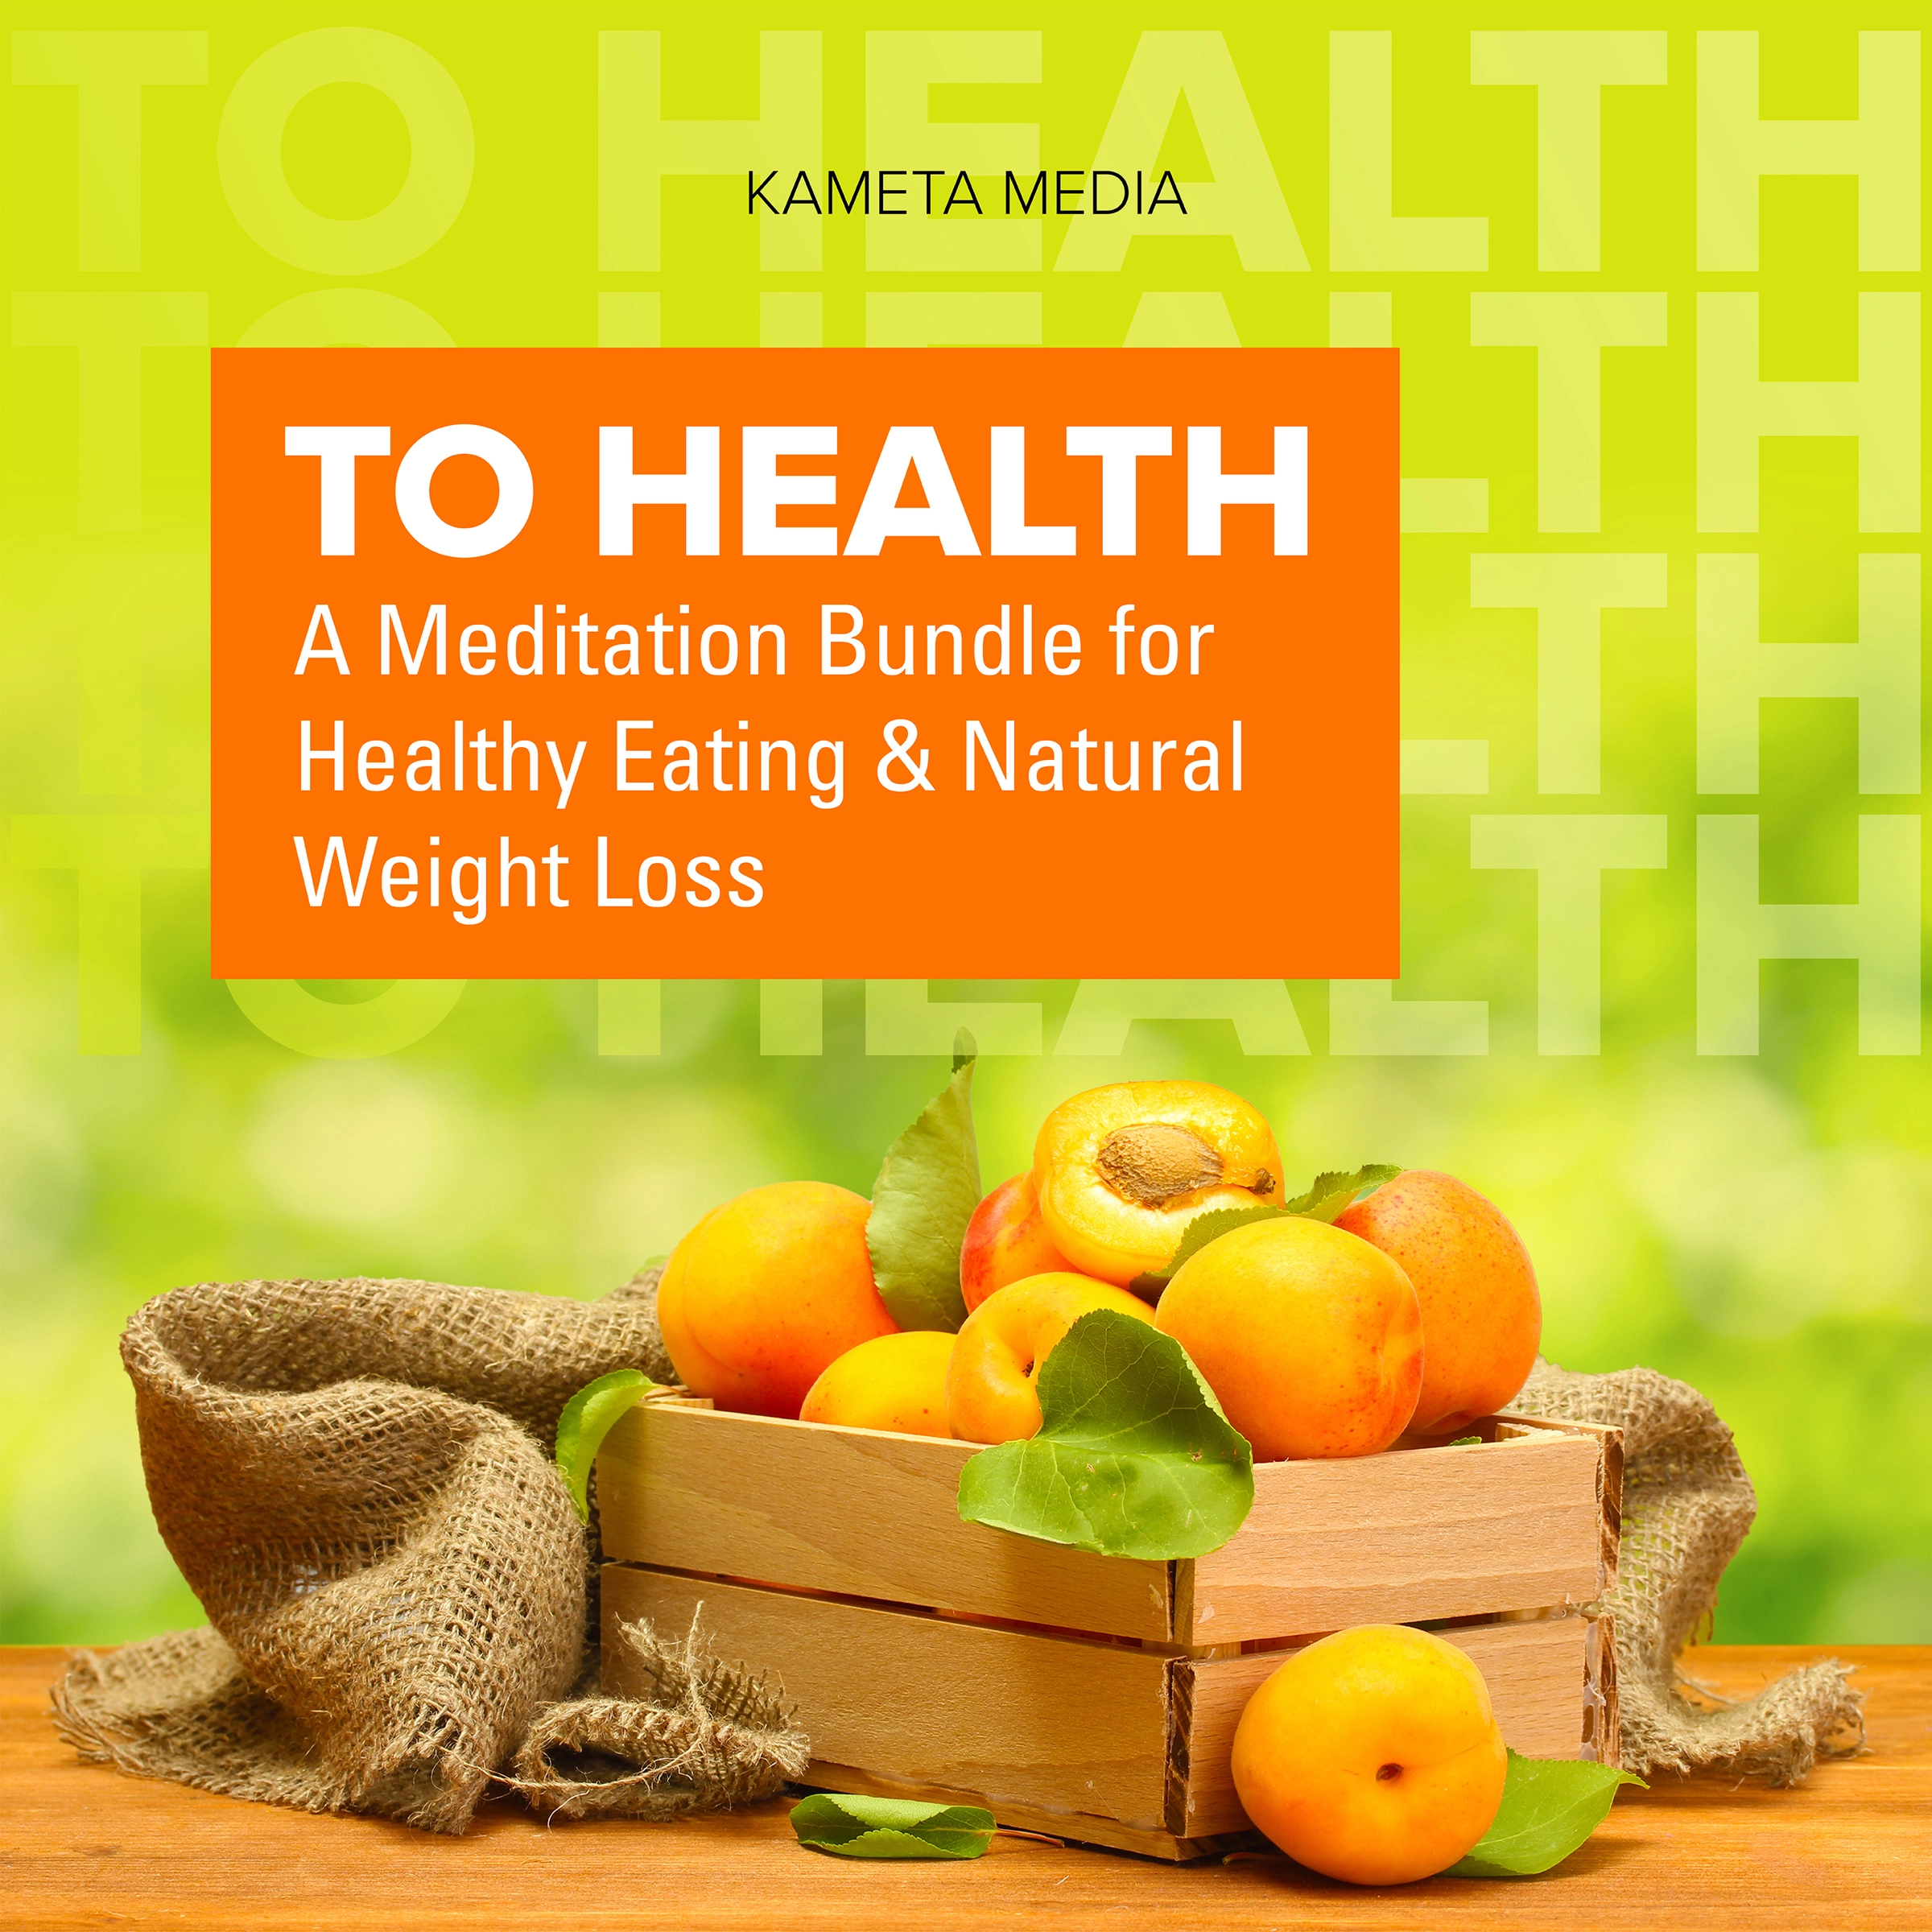 To Health: A Meditation Bundle for Healthy Eating and Natural Weight Loss Audiobook by Kameta Media